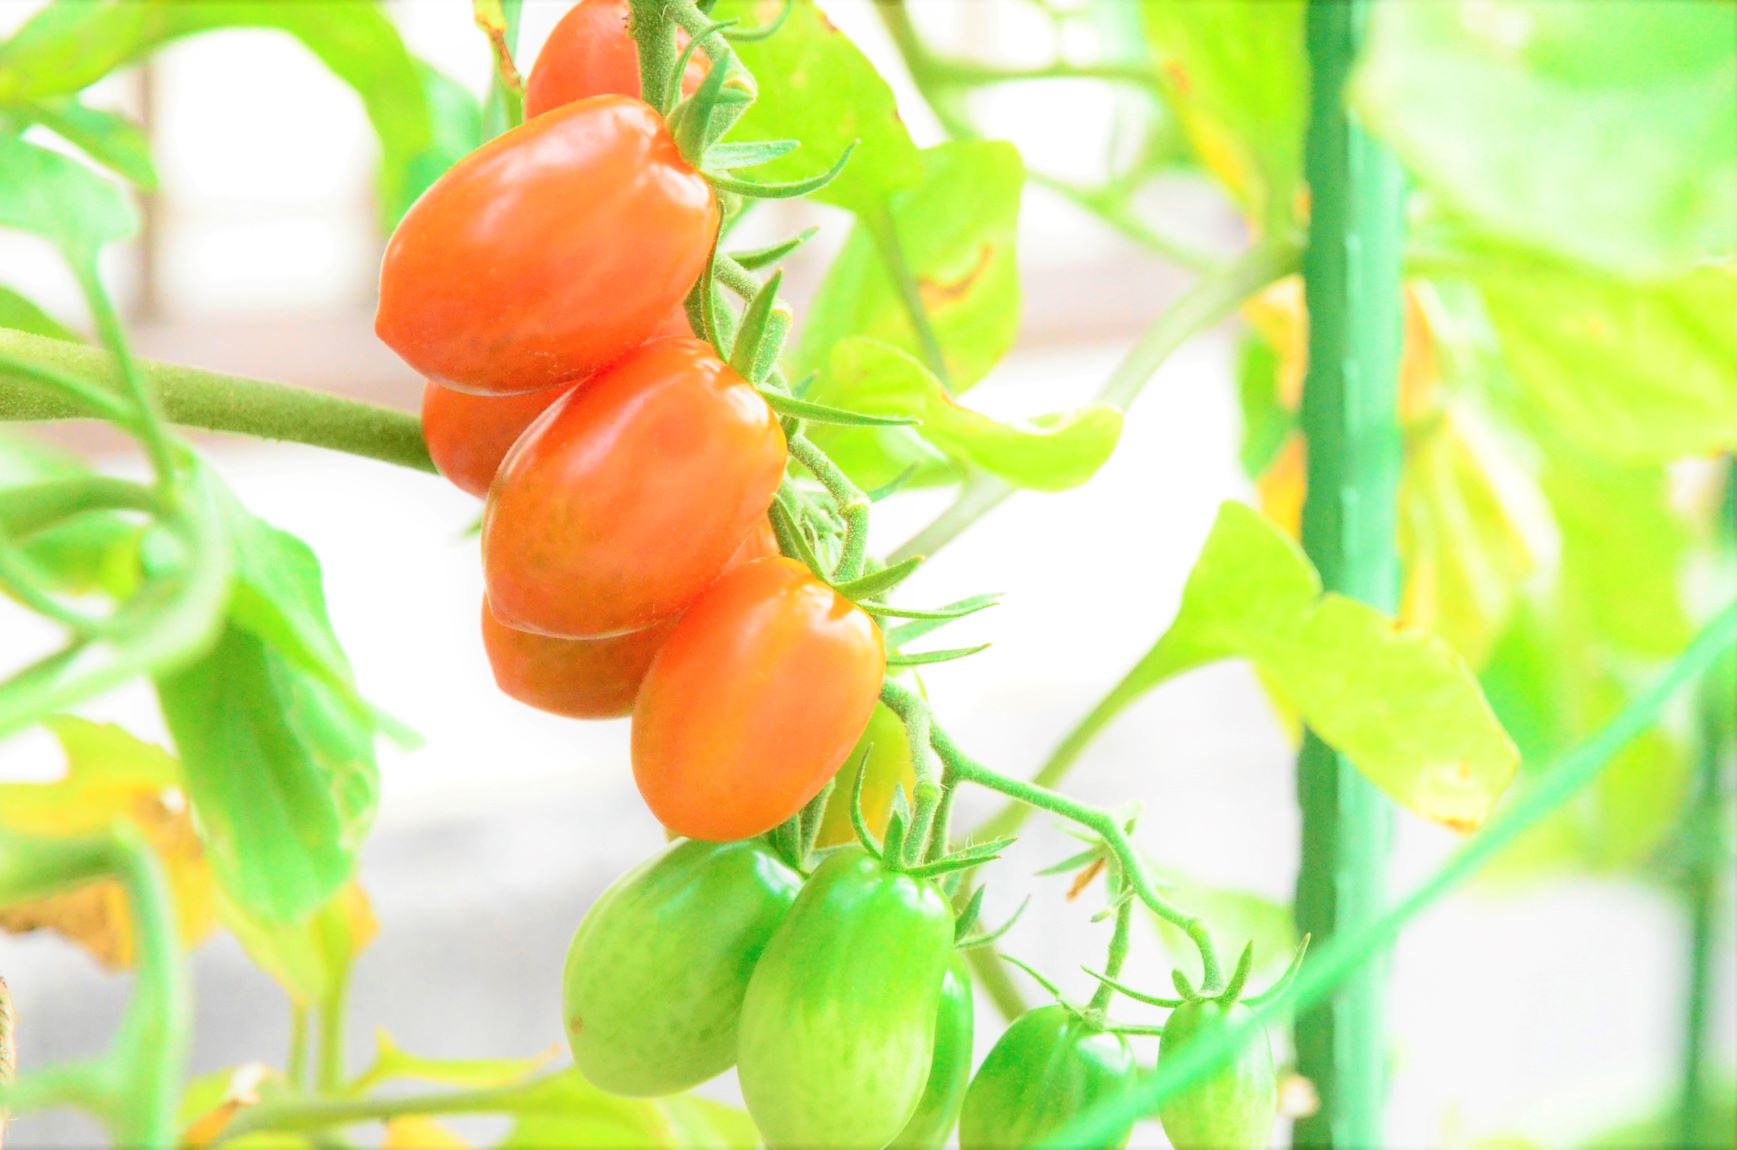 The mini tomatoes are turning red